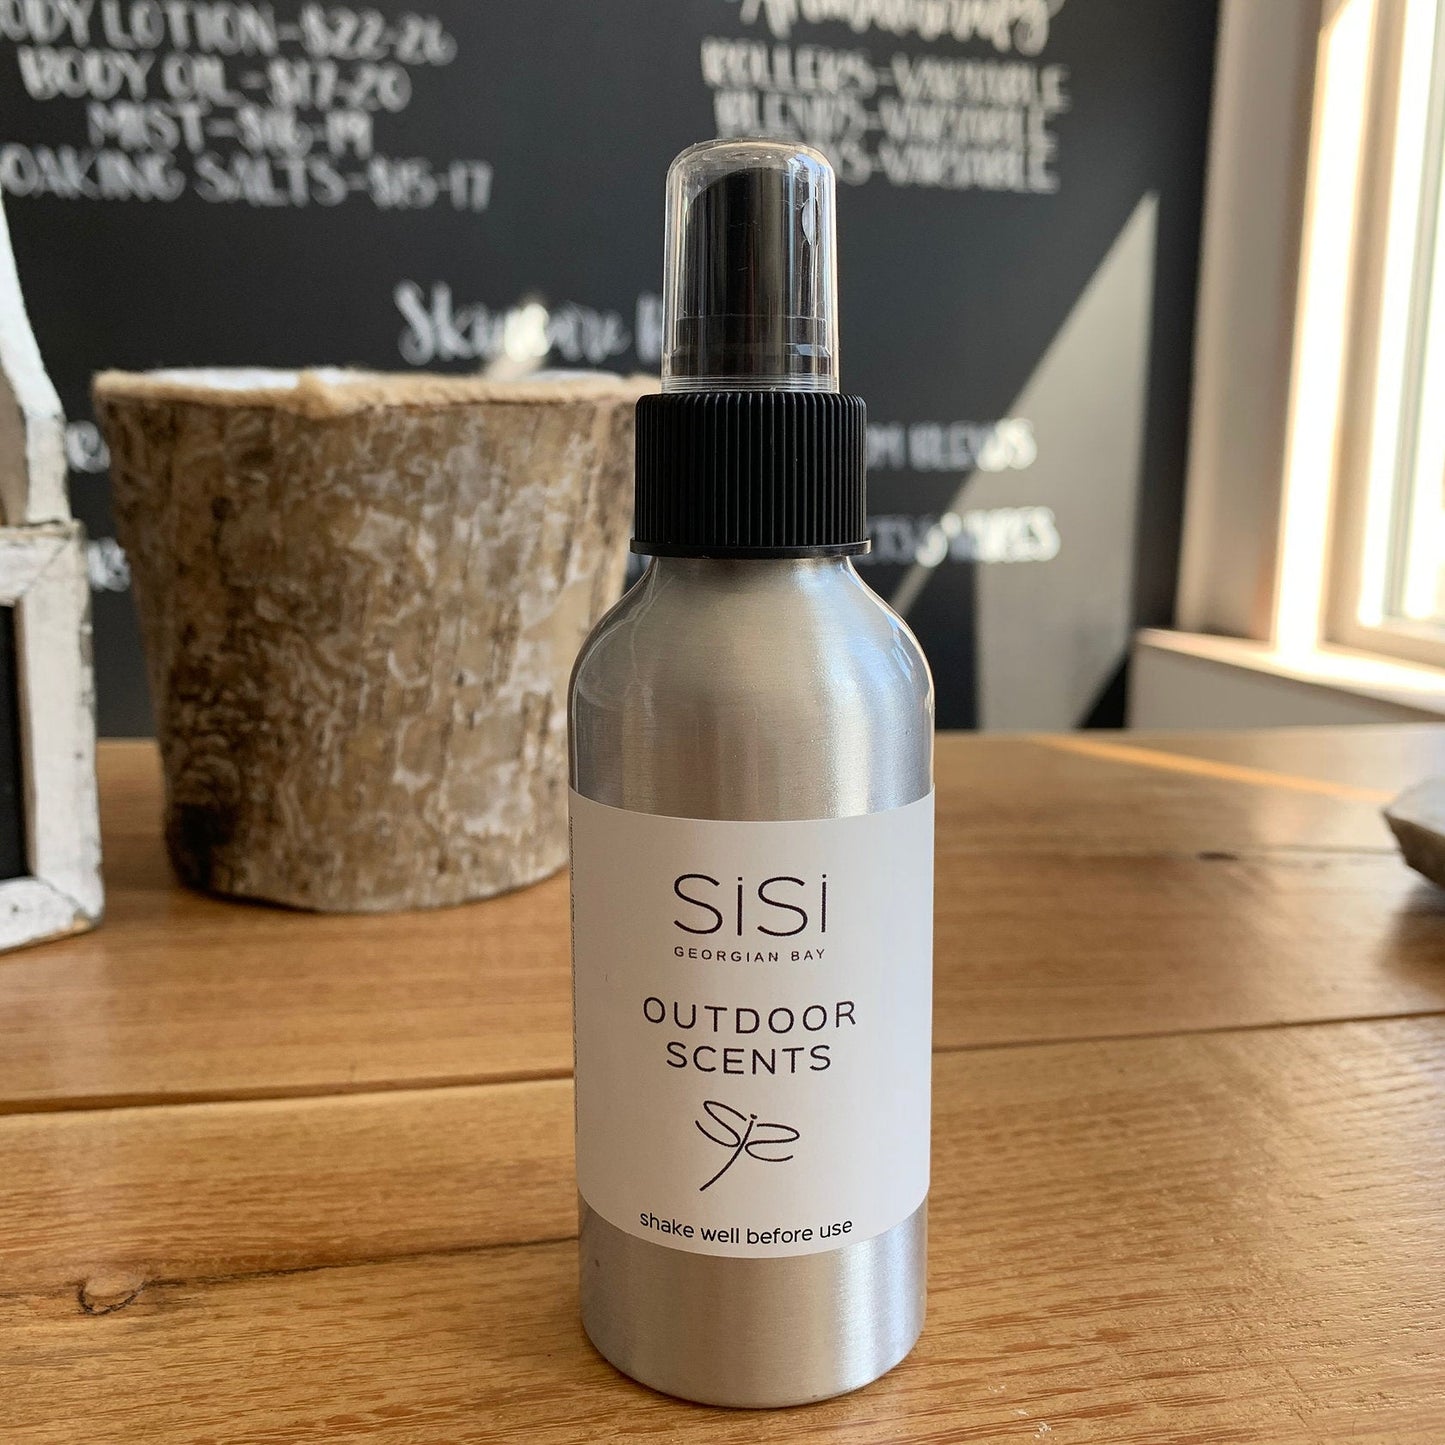 natural skincare products - aromatherapy - outdoorscents - sisi georgian bay northern ontario